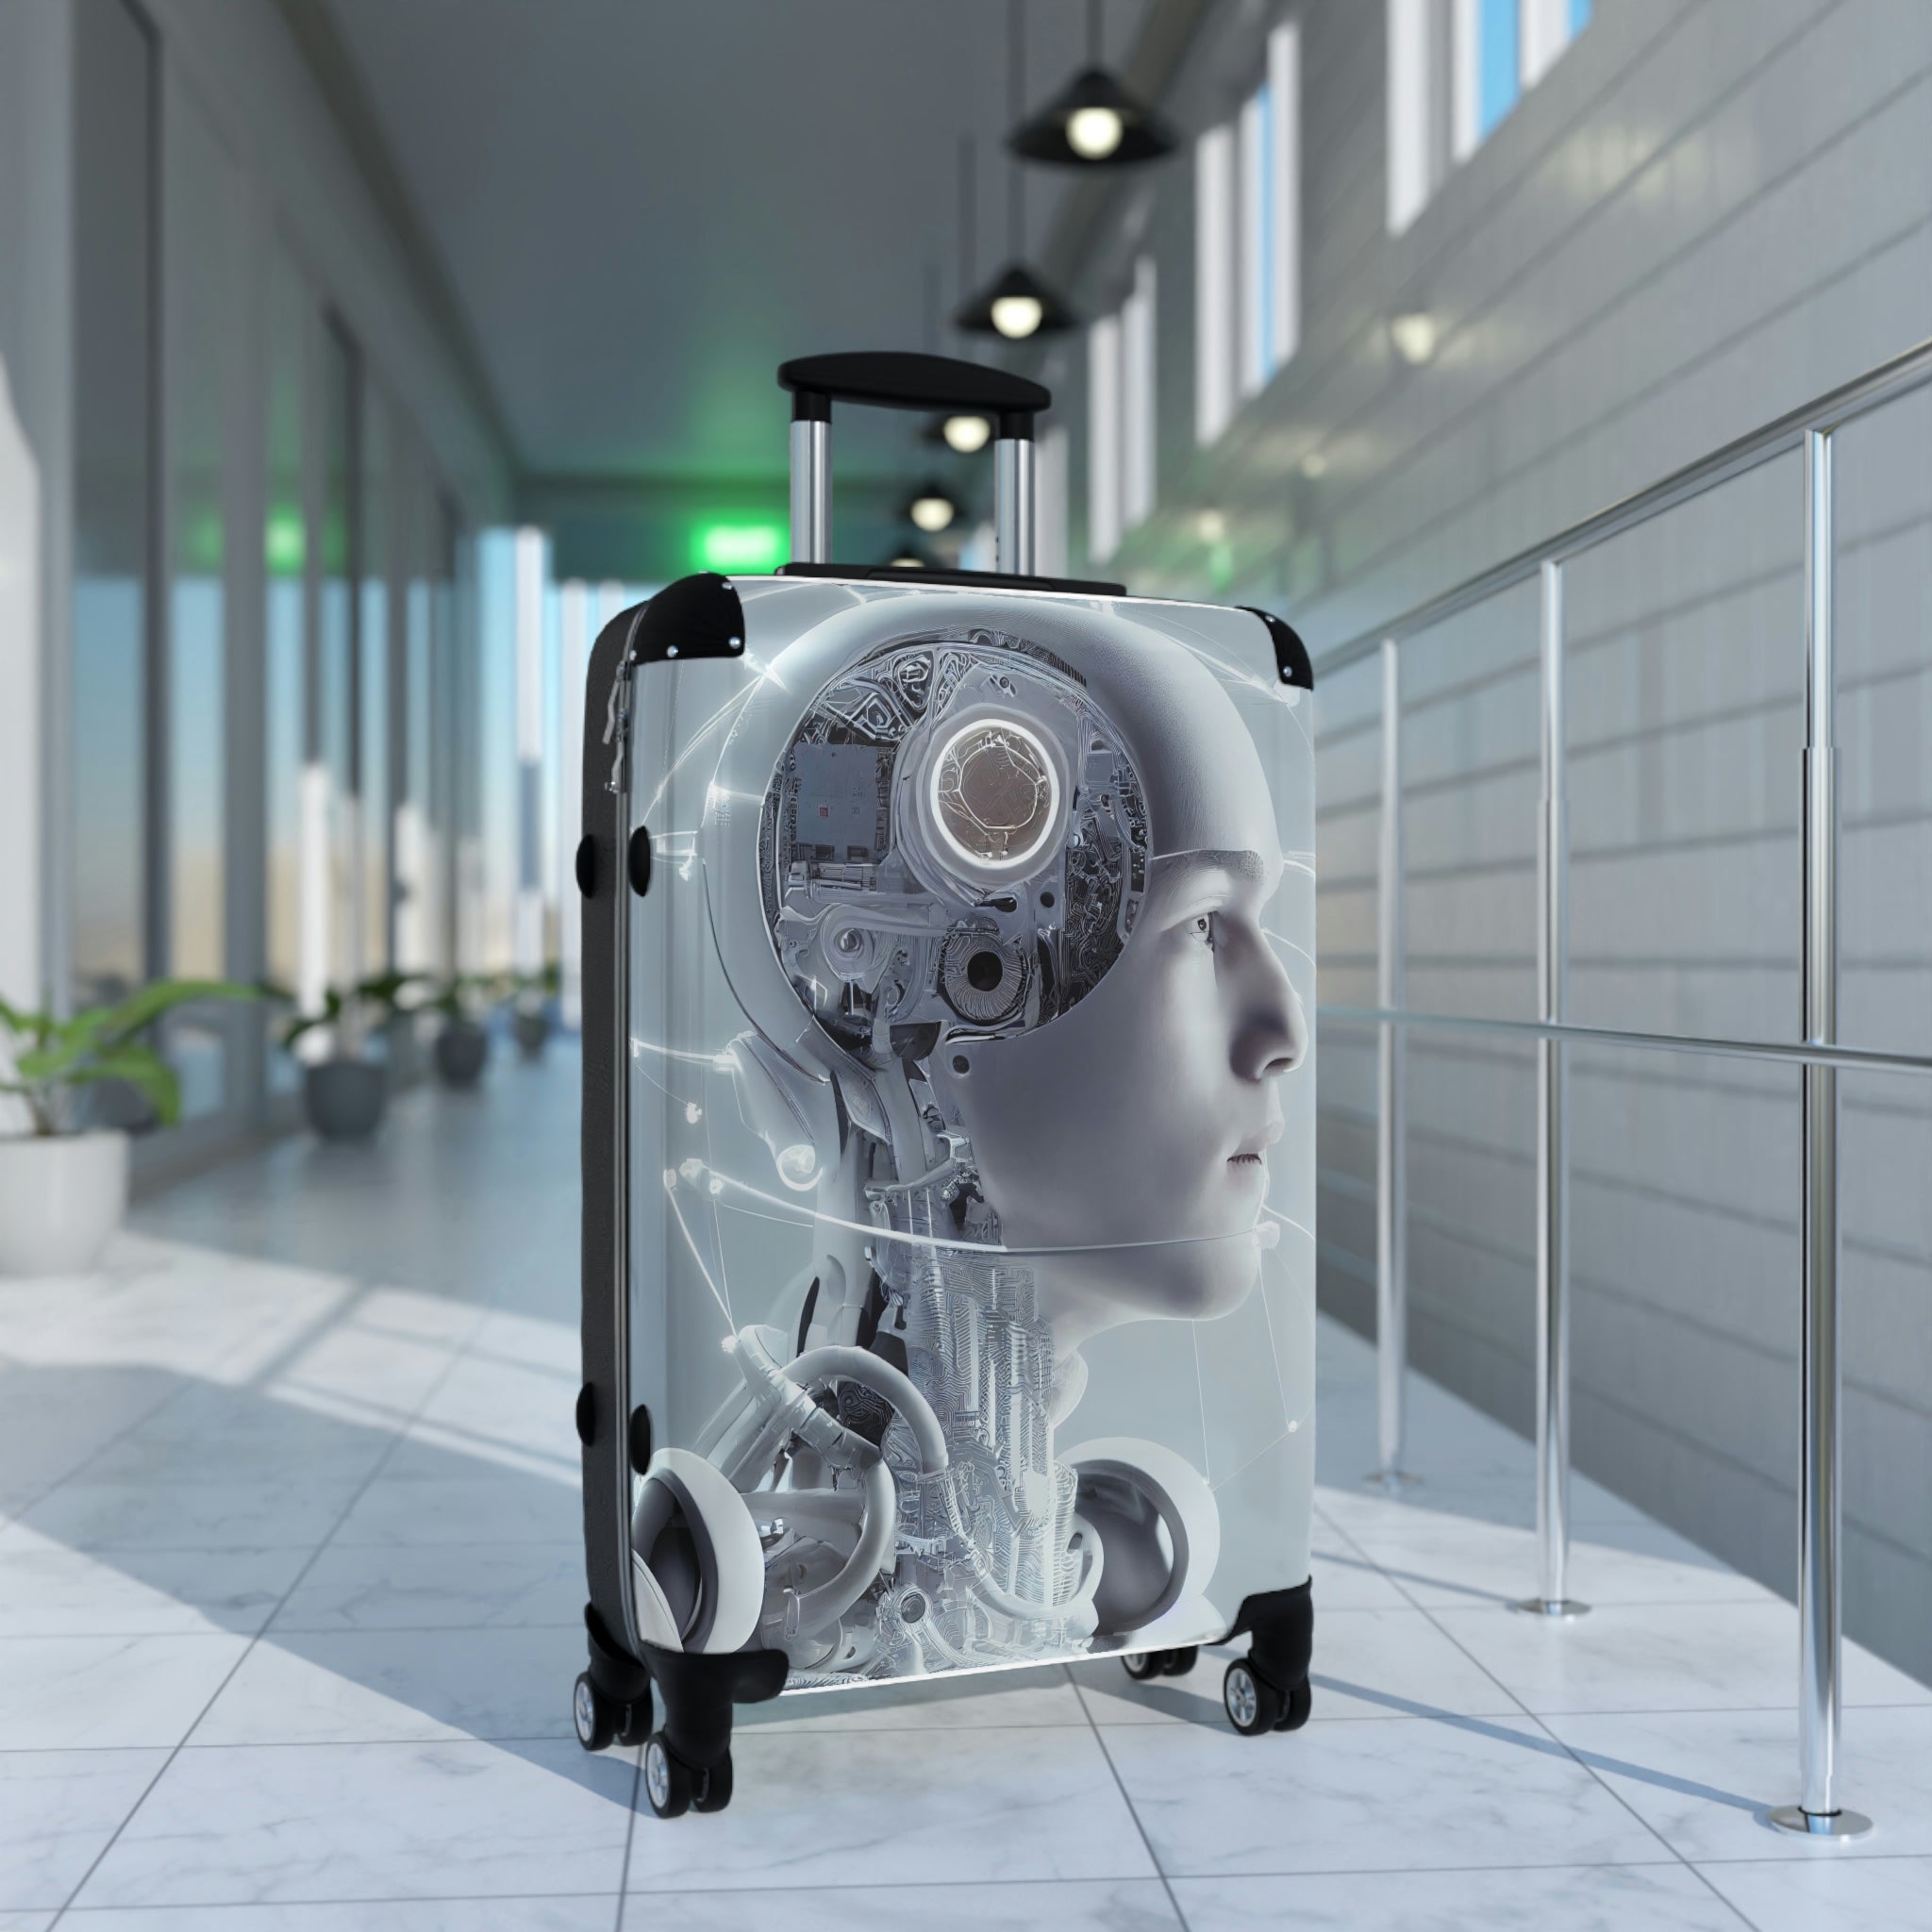 The Future is NOW! (His) - Travel Suitcase